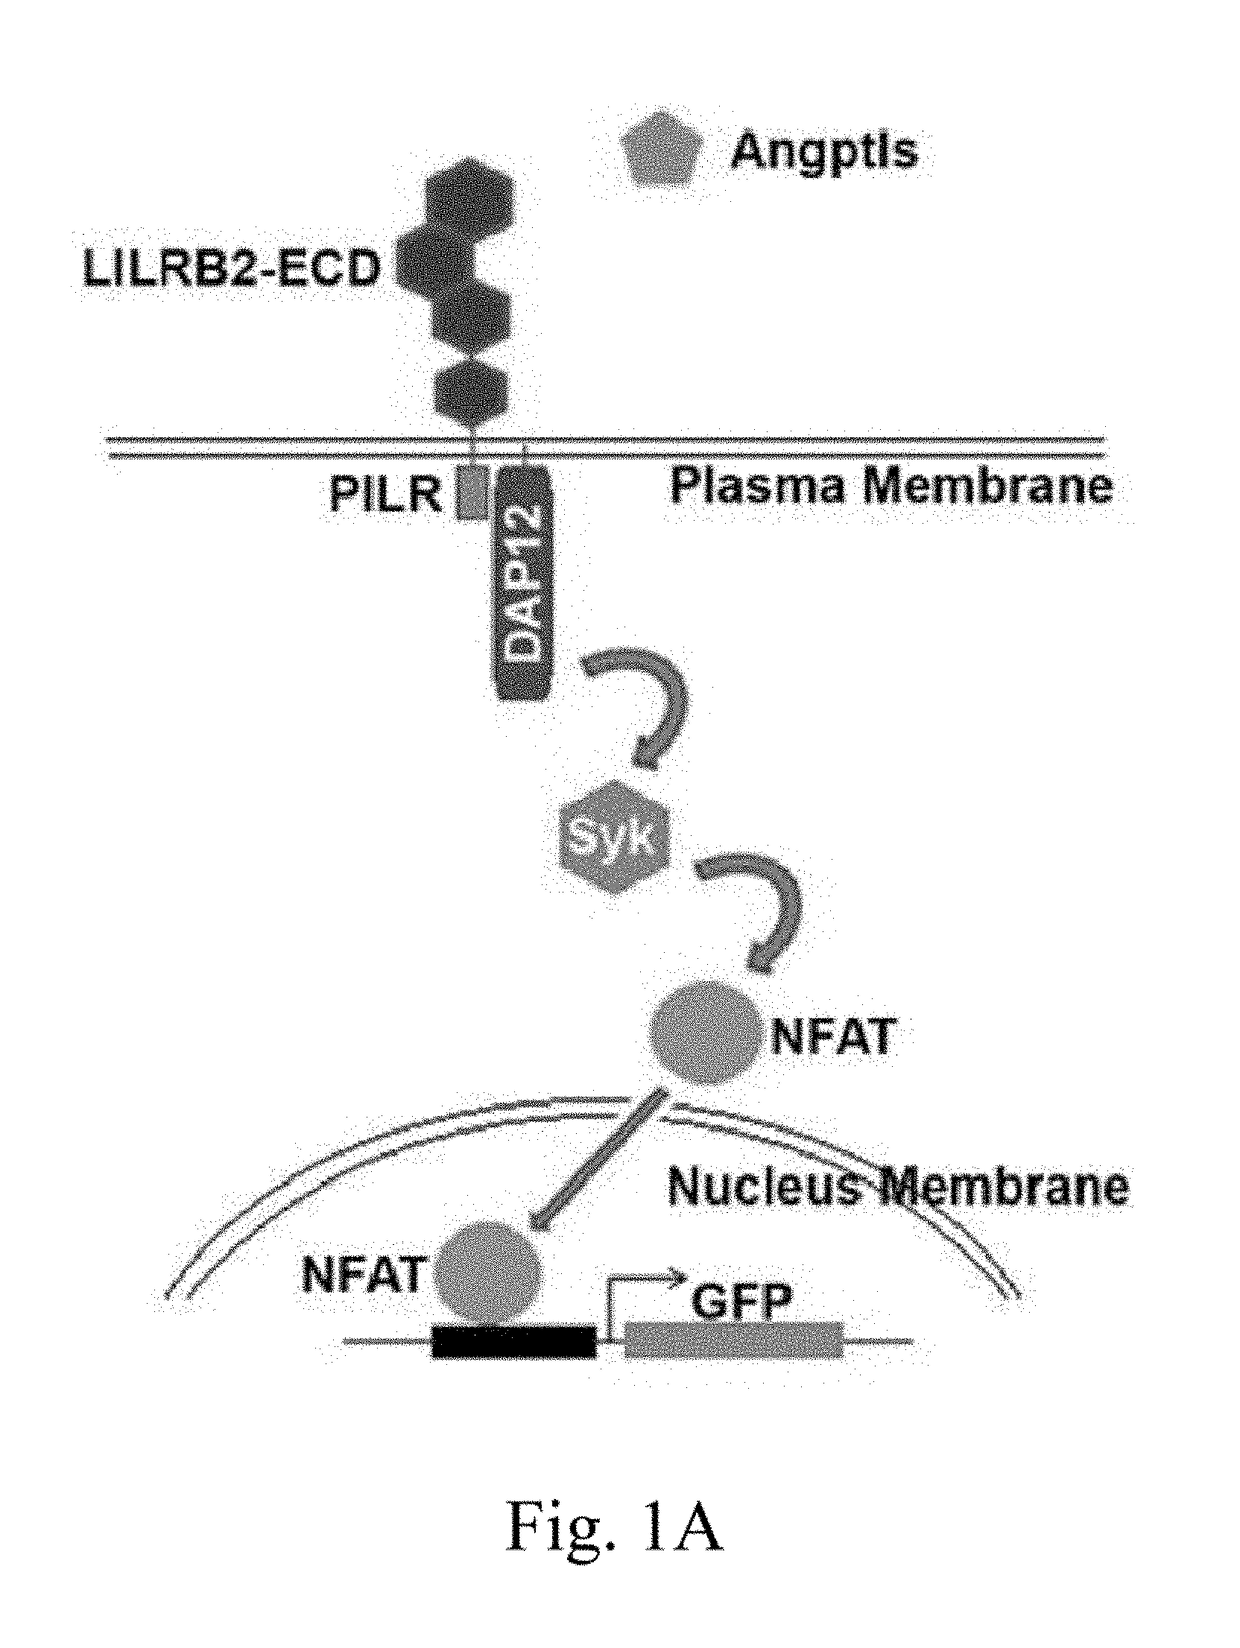 Lilrb2 and notch-mediated expansion of hematopoietic precursor cells